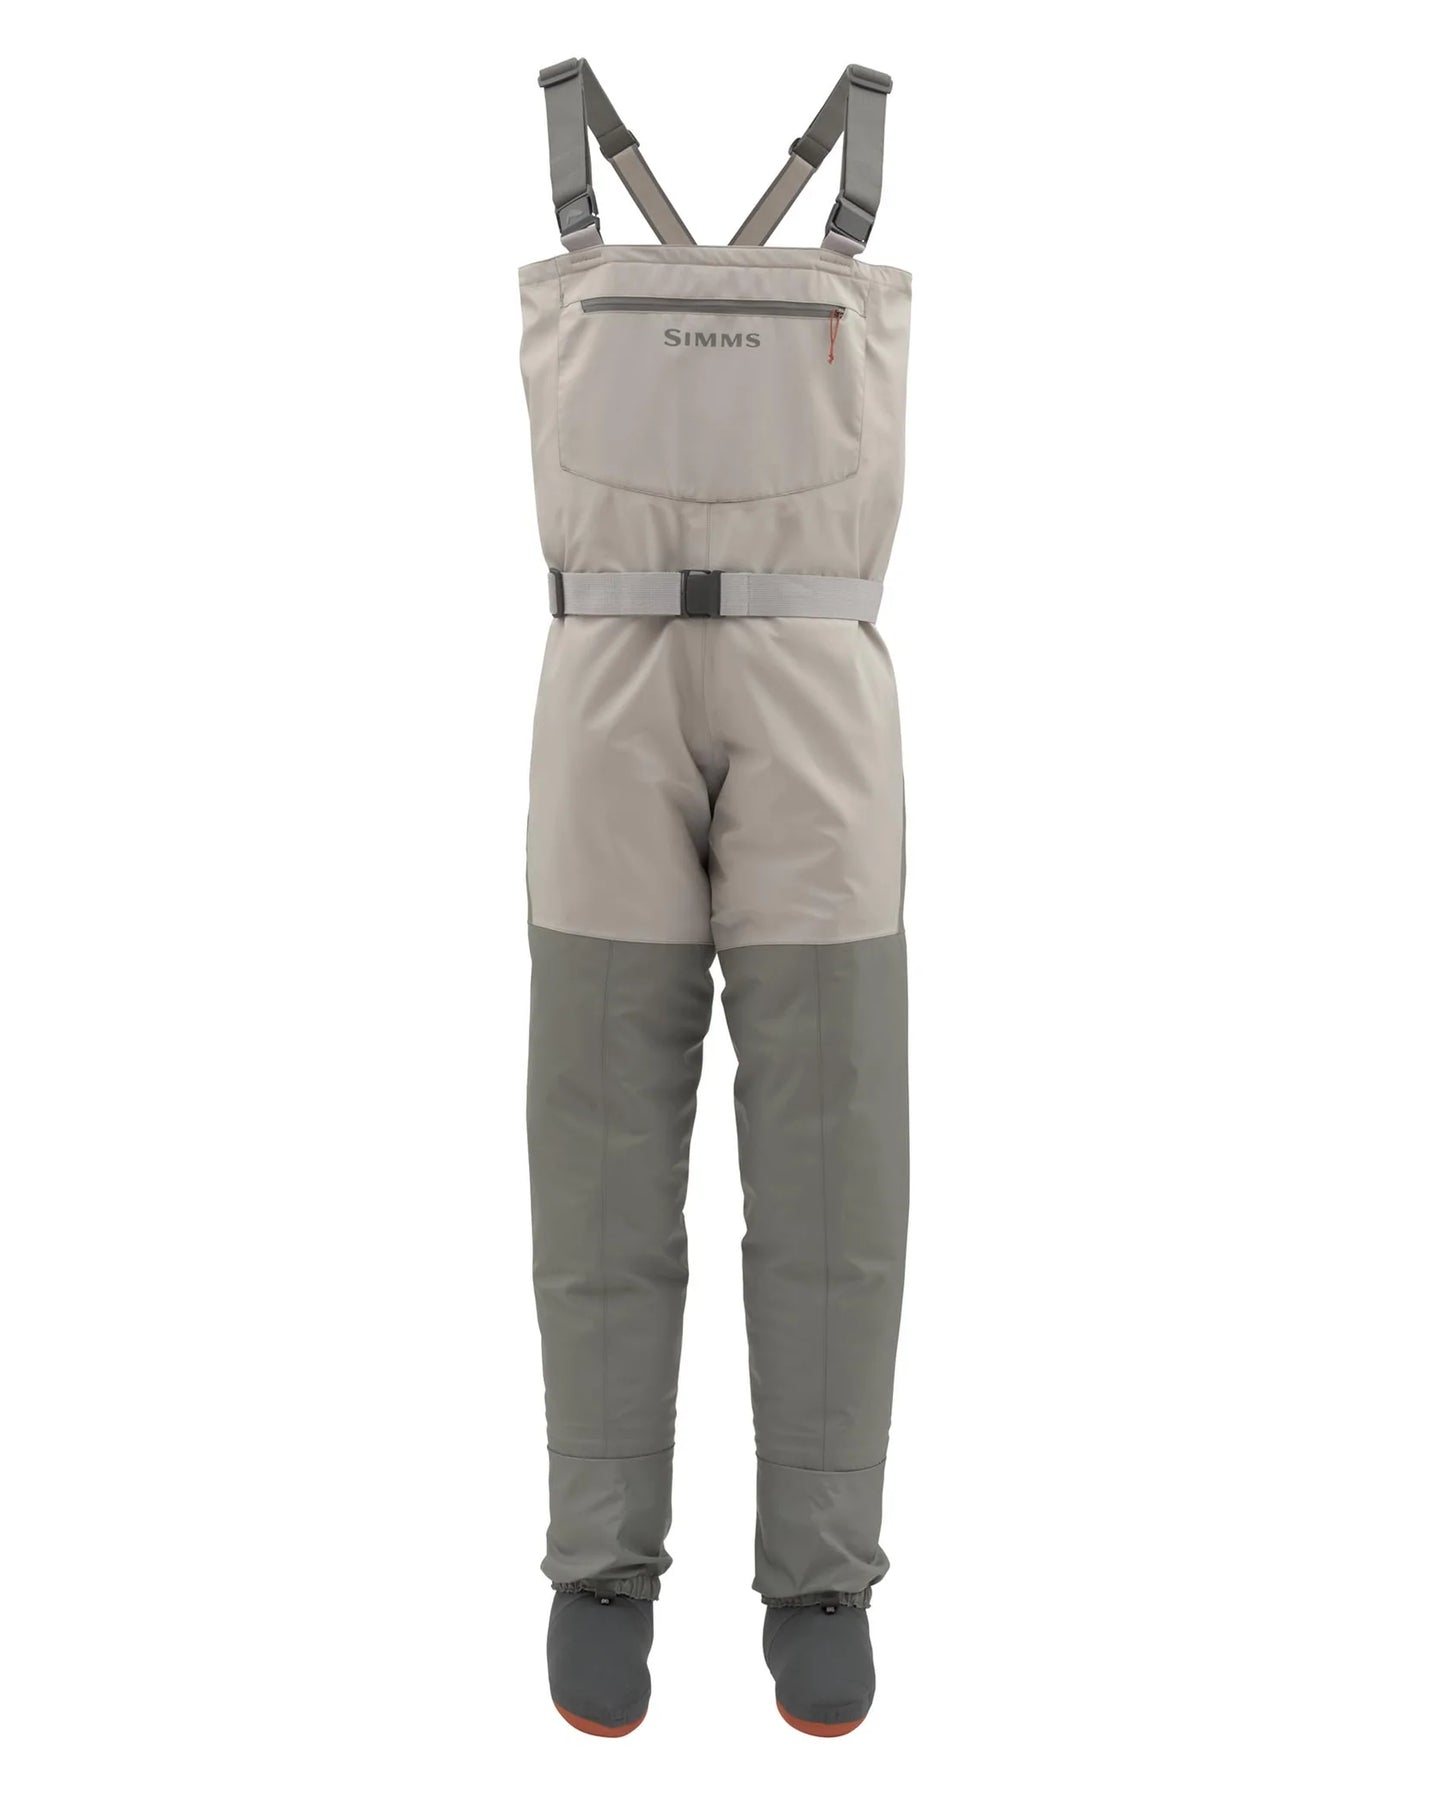 Simms Women's Tributary Stockingfoot Waders (Discontinued)